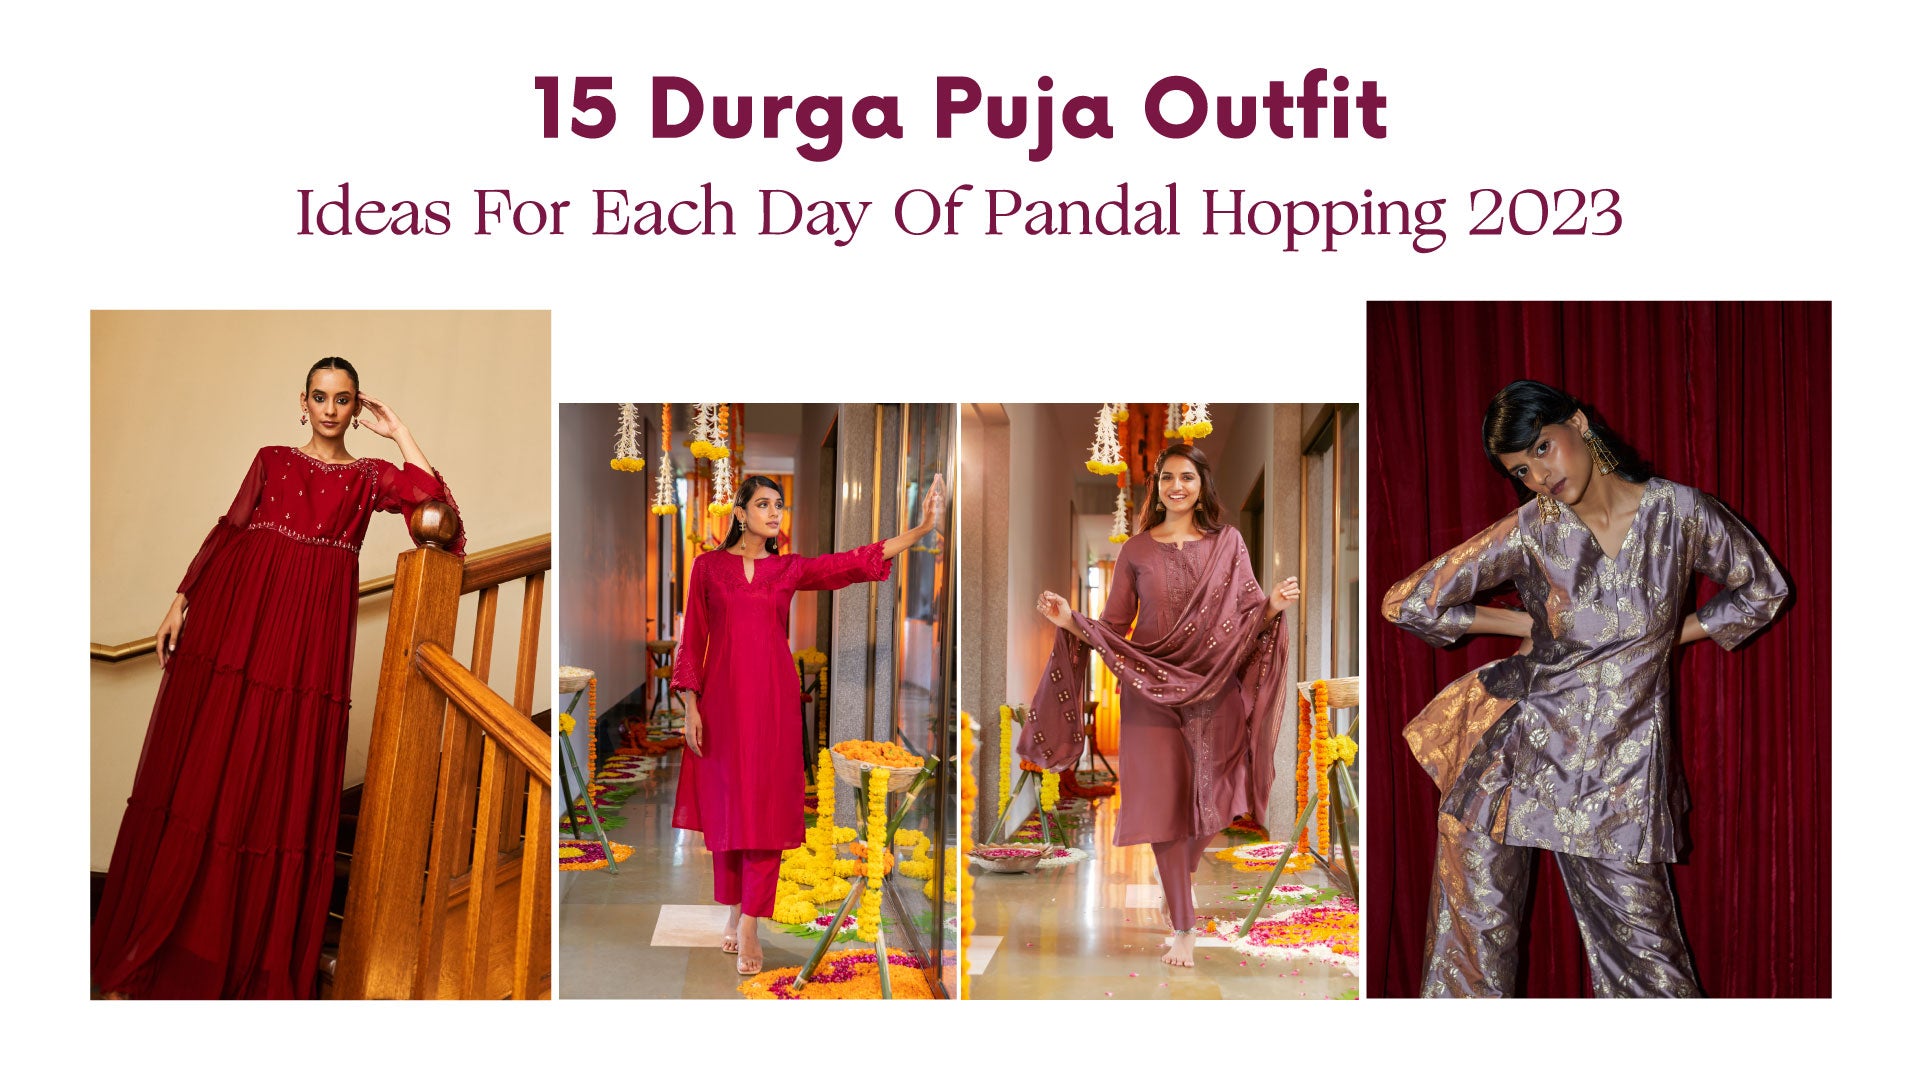 15 Durga Puja Outfit Ideas For Each Day Of Pandal Hopping 2023